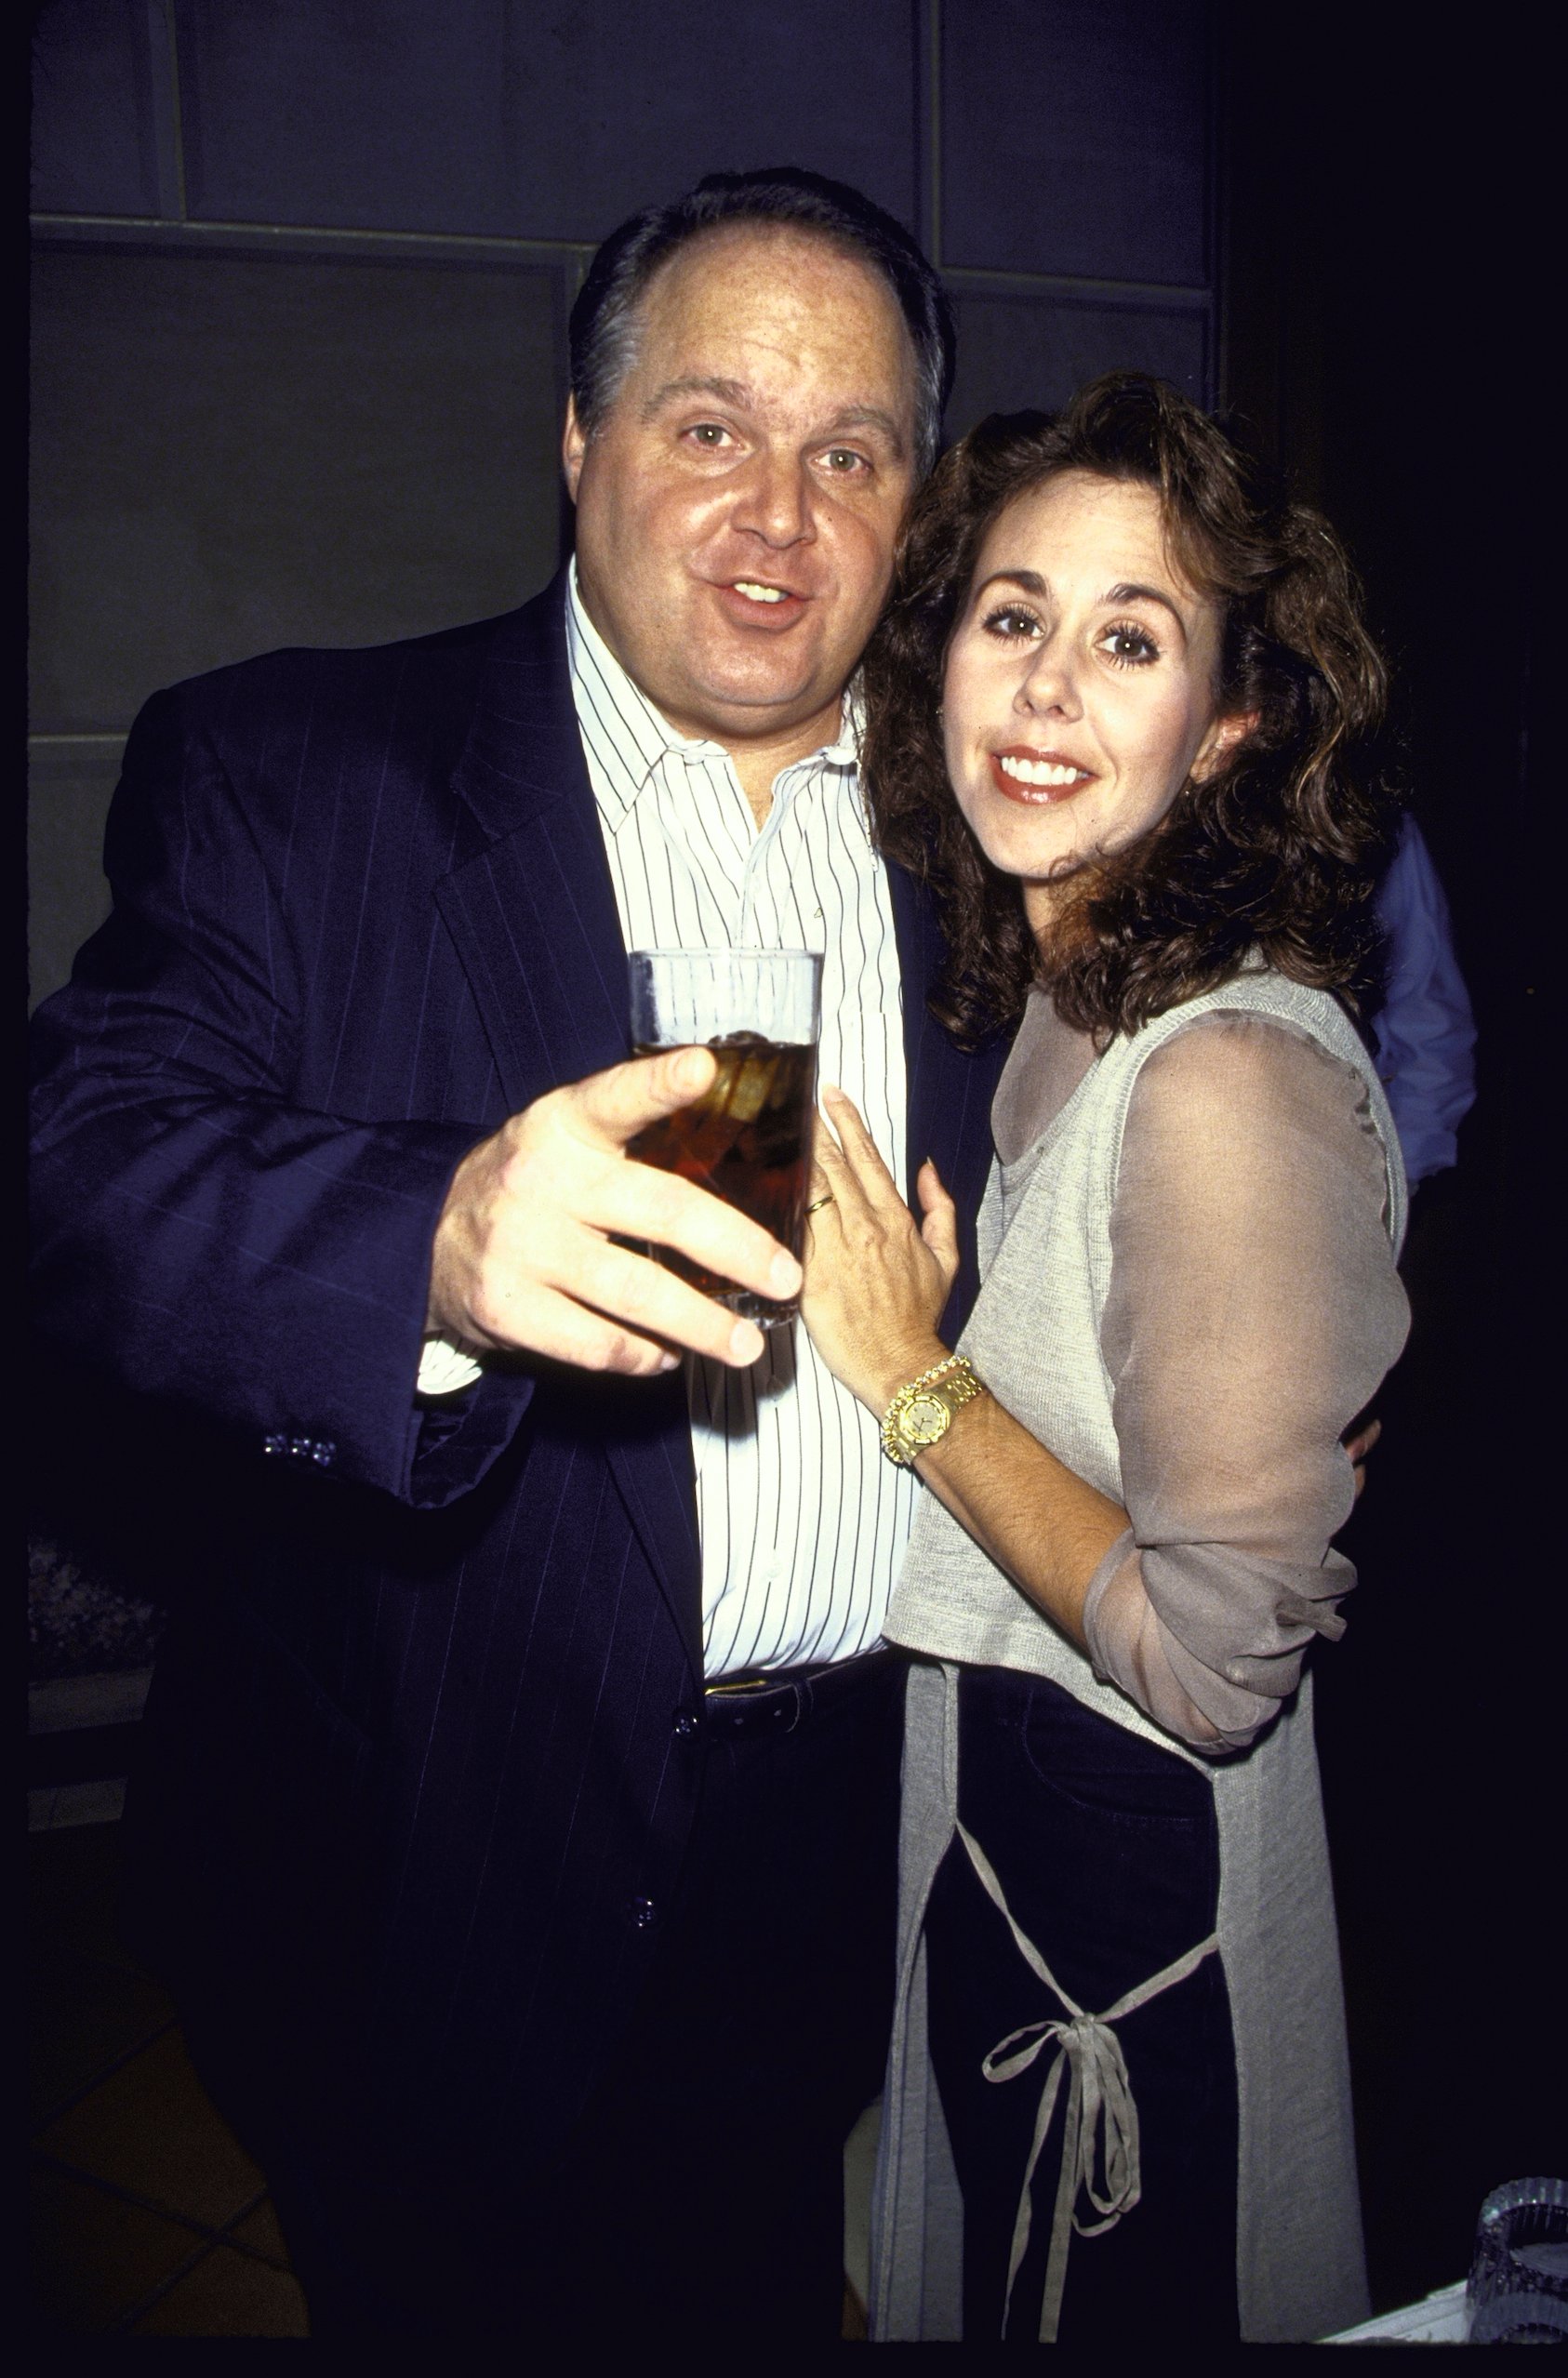 Rush Limbaugh with his arm around wife Marta Fitzgerald